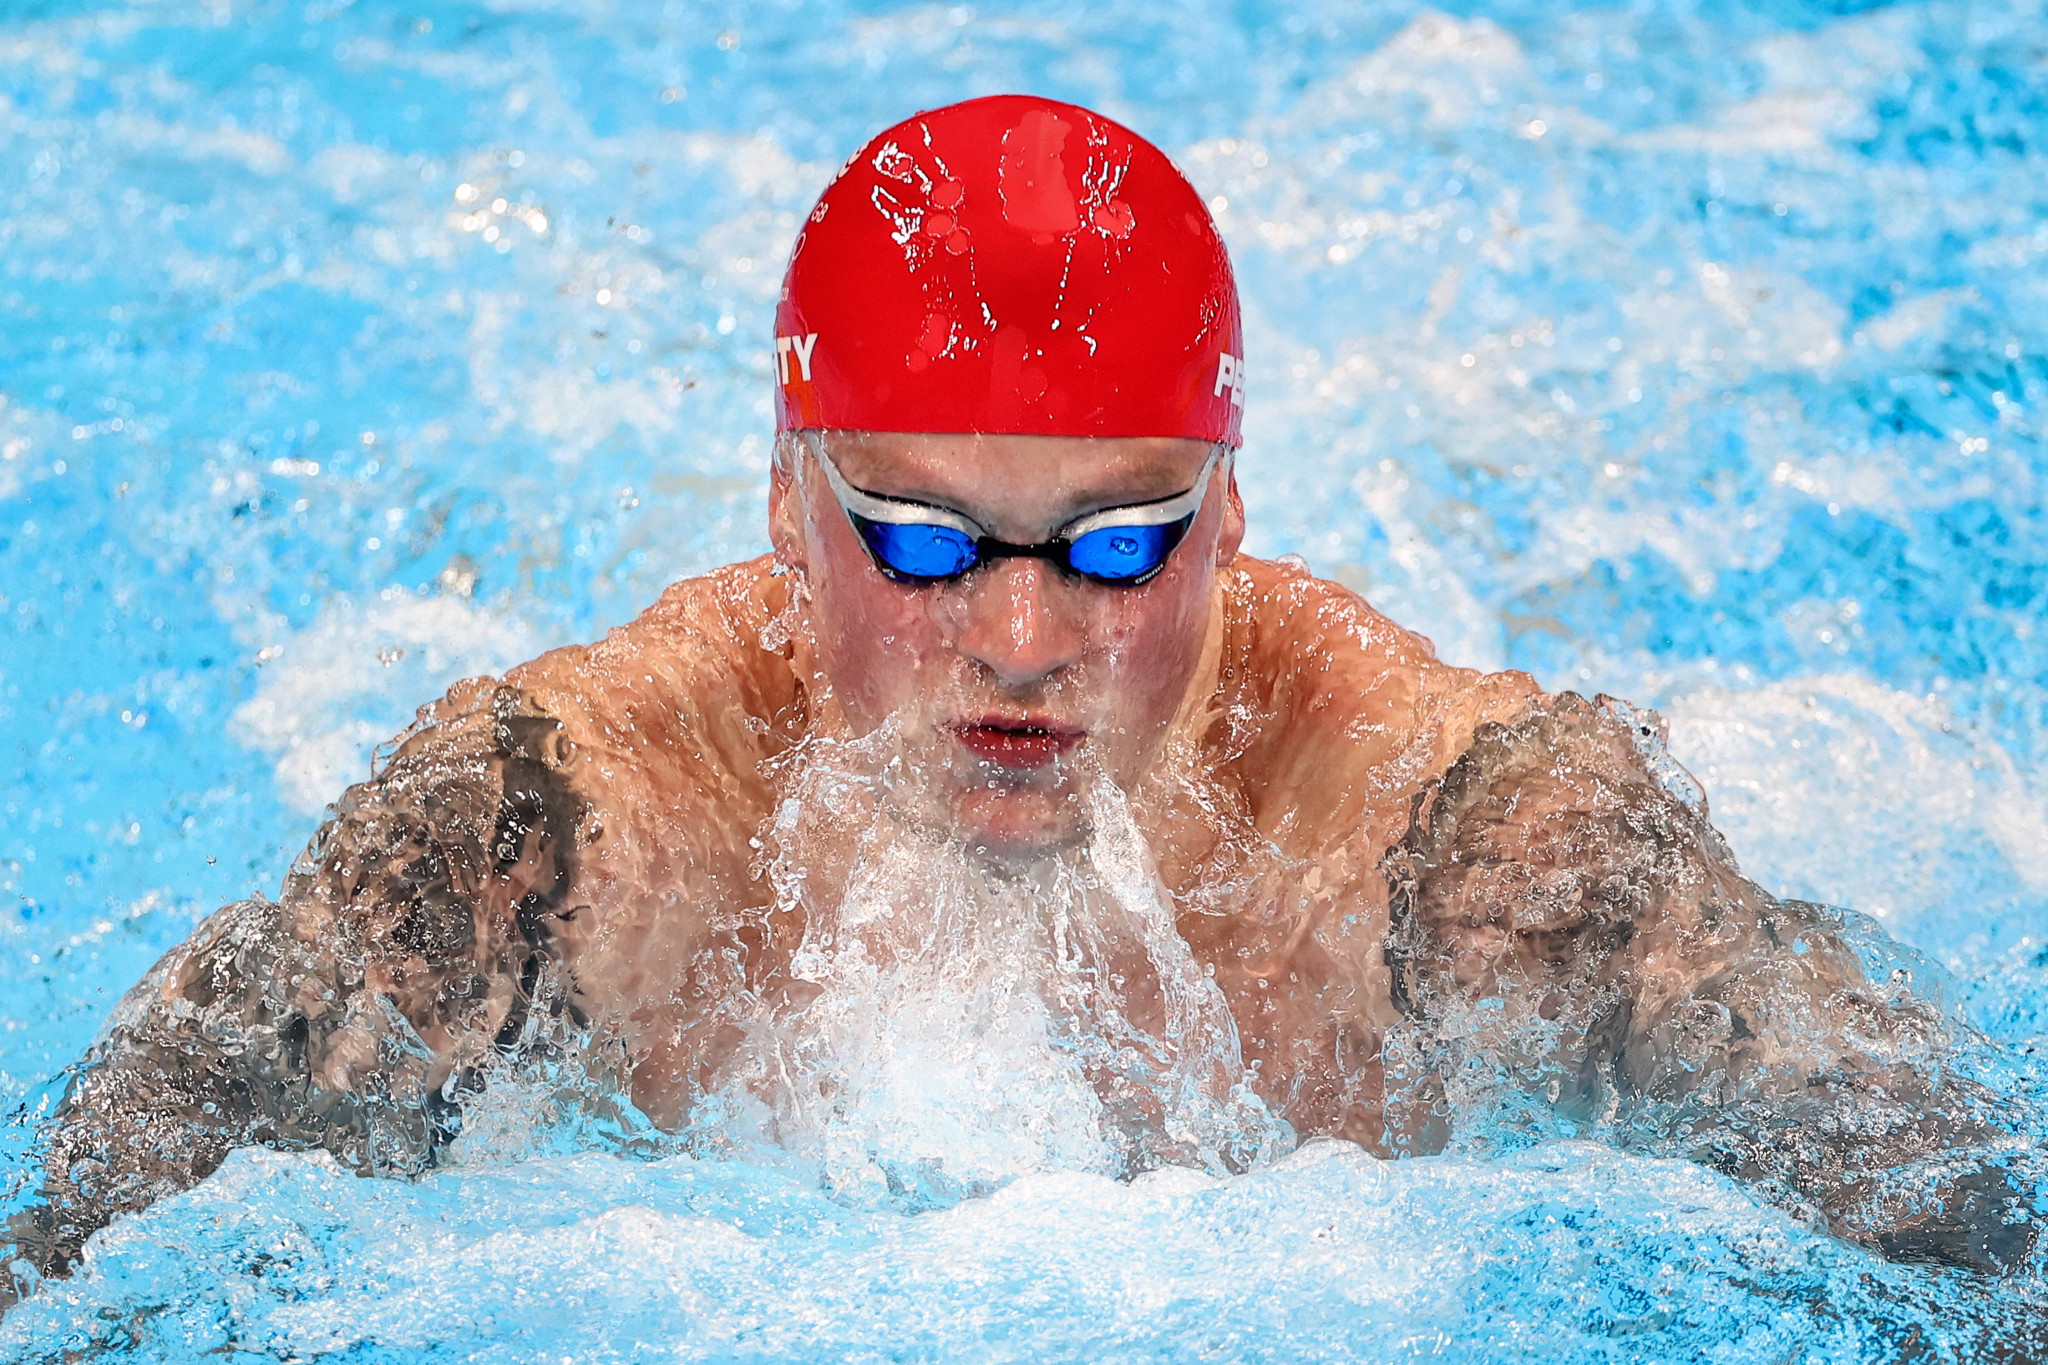 Adam Peaty has won the men's 100 metres breaststroke at the last two Olympics ©Getty Images